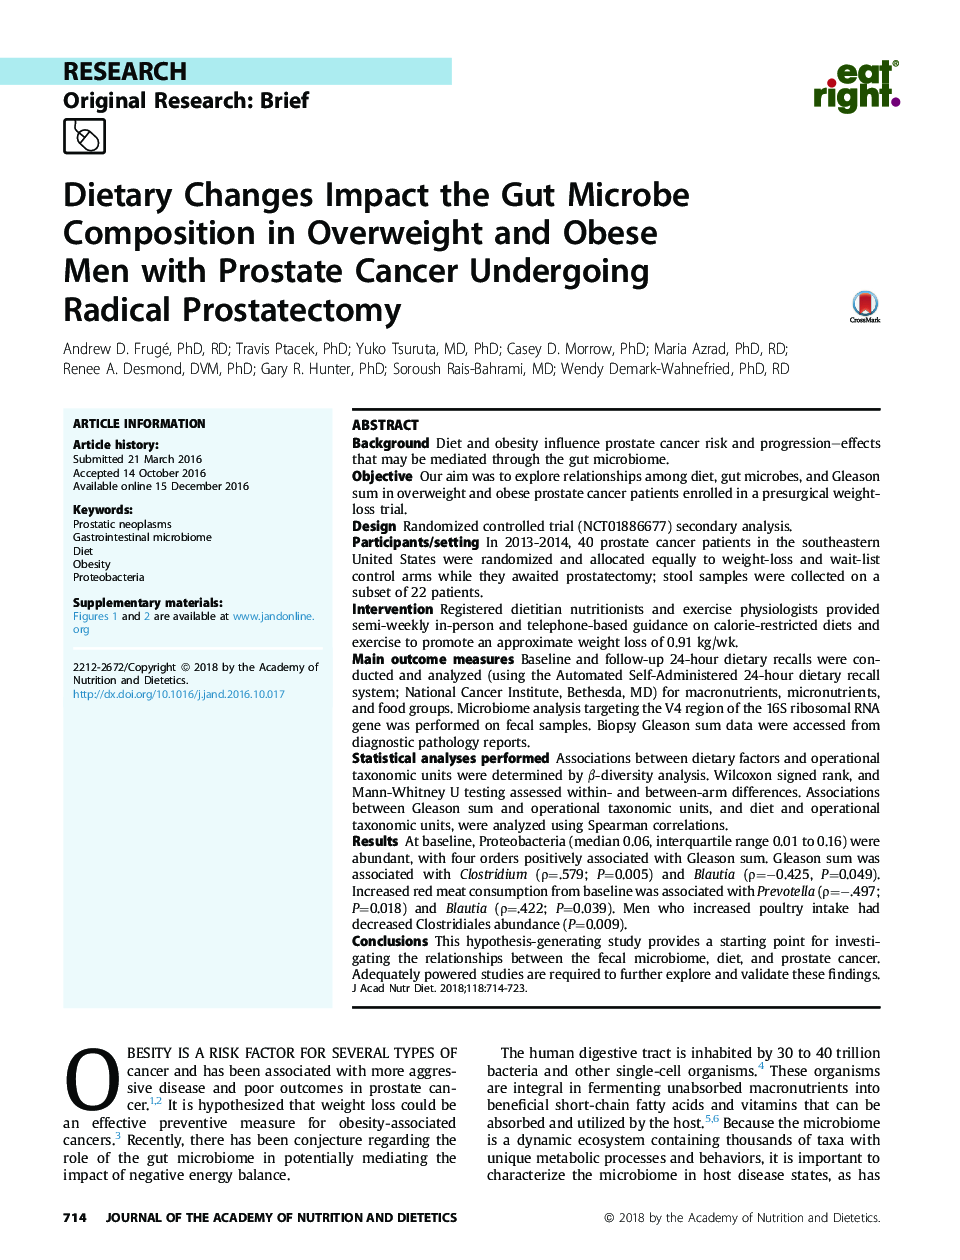 Dietary Changes Impact the Gut Microbe Composition in Overweight and Obese MenÂ with Prostate Cancer Undergoing RadicalÂ Prostatectomy